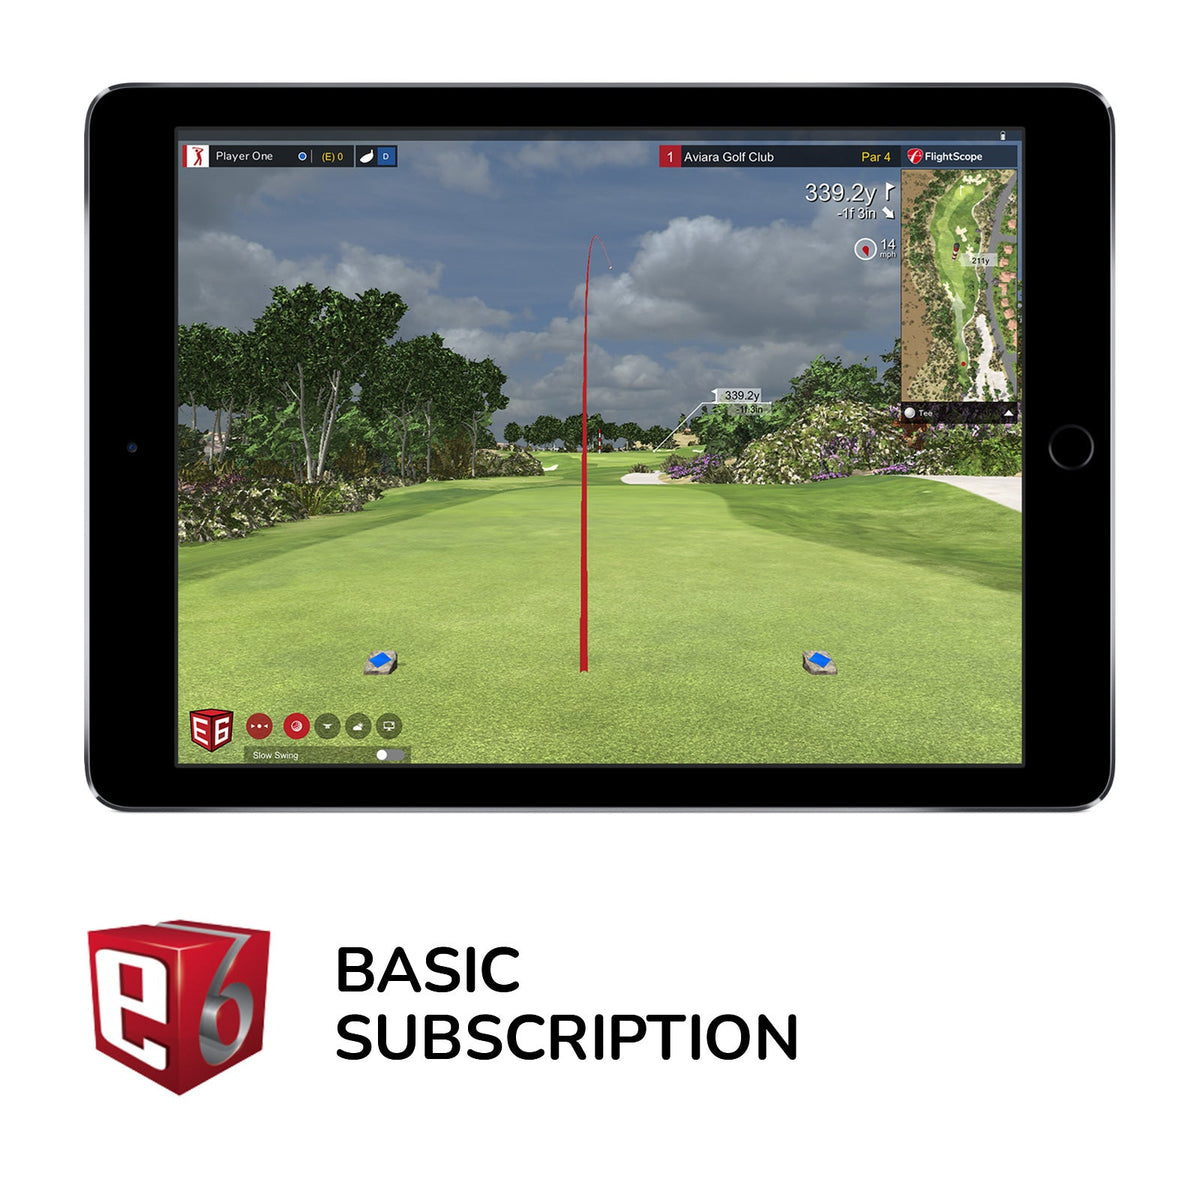 FlightScope - TruGolf E6 Connect - Annual Basic Subscription Plan